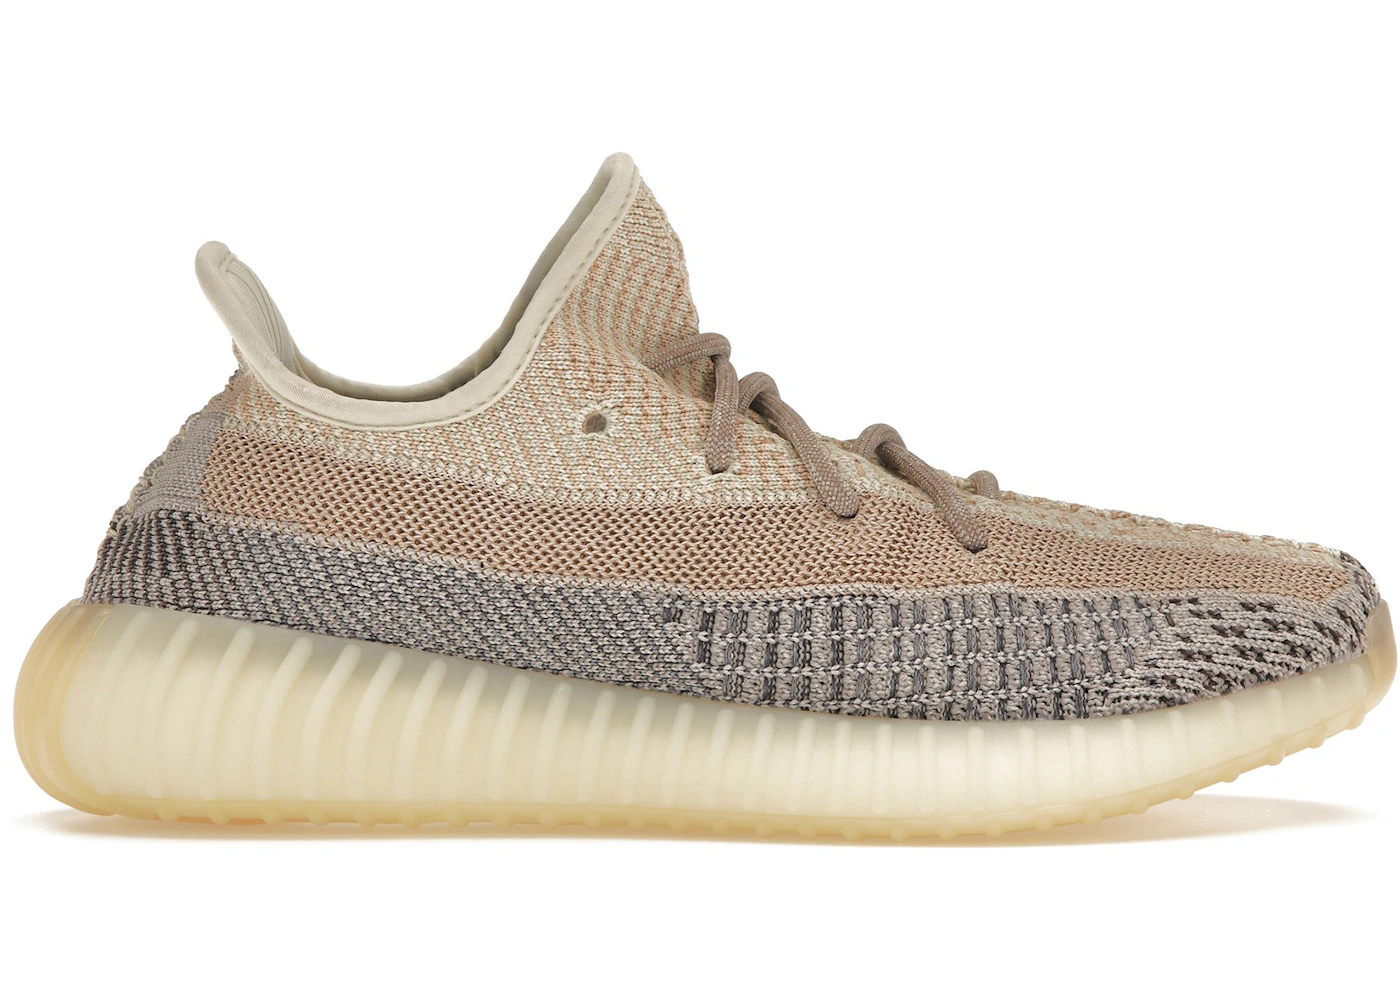 Motherland konvergens Lager adidas Yeezy Boost 350 V2 Ash Pearl Men's - GY7658 - US